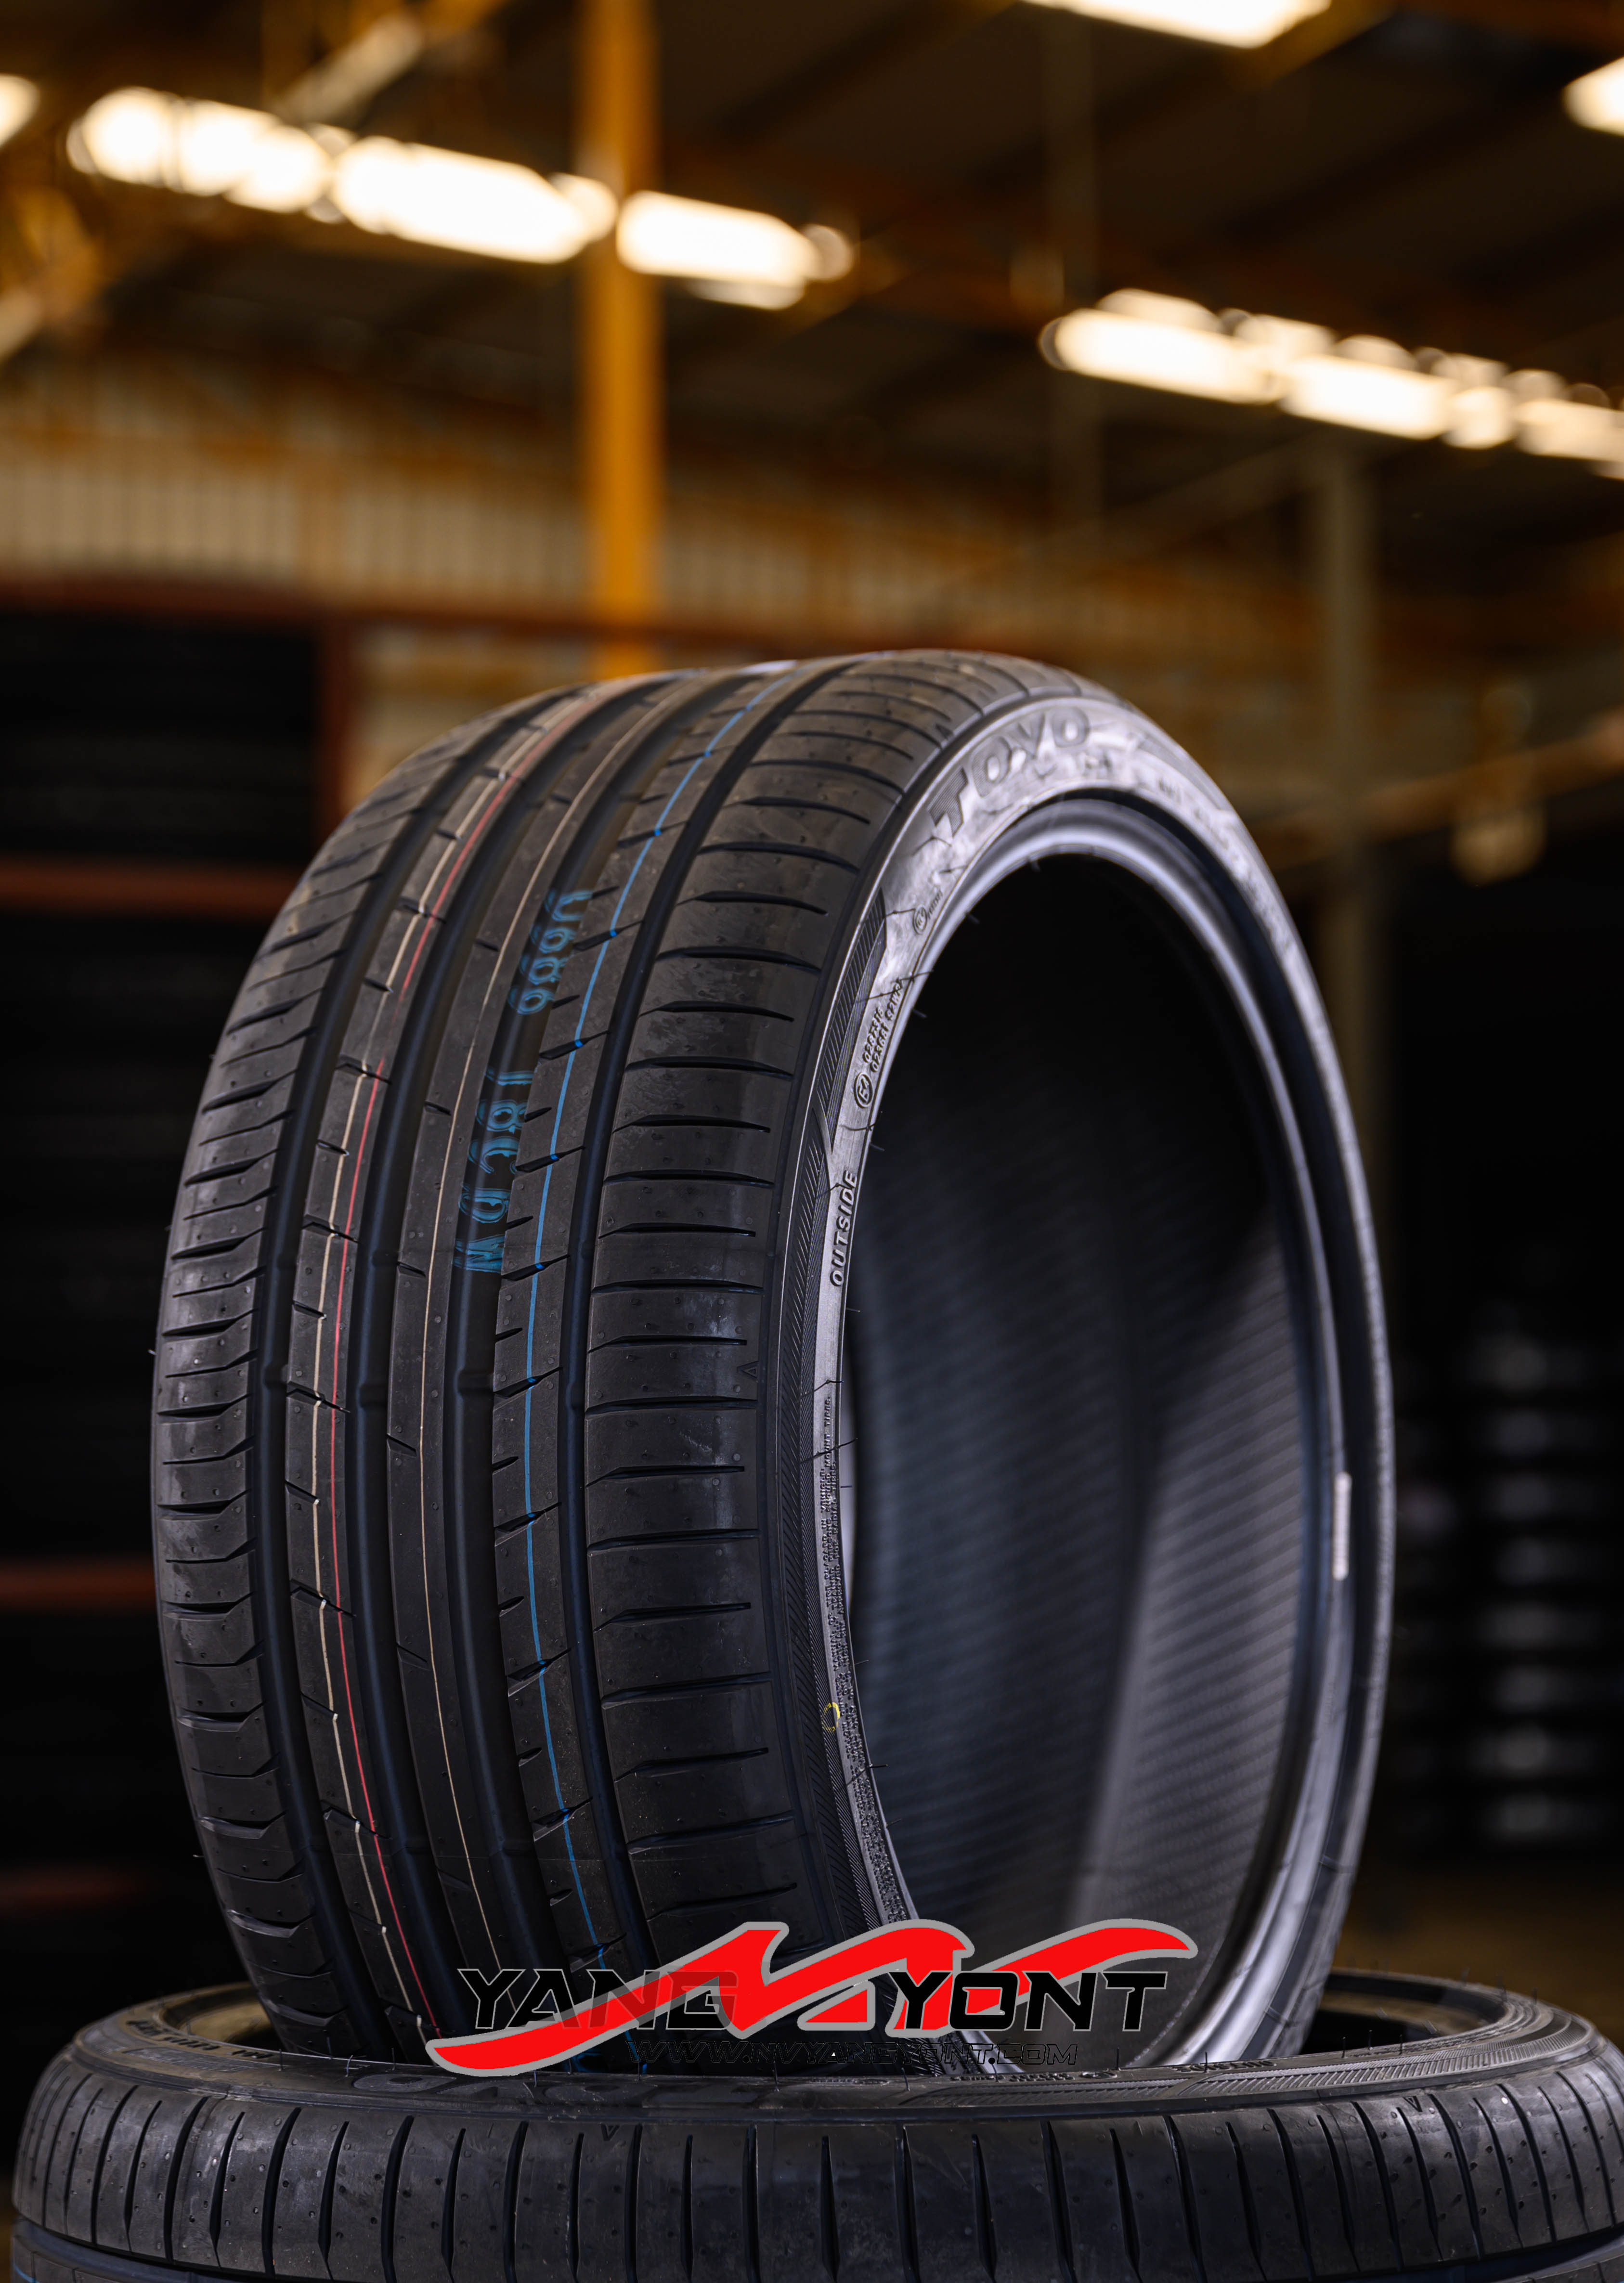 305/25 R20 Proxes Sport